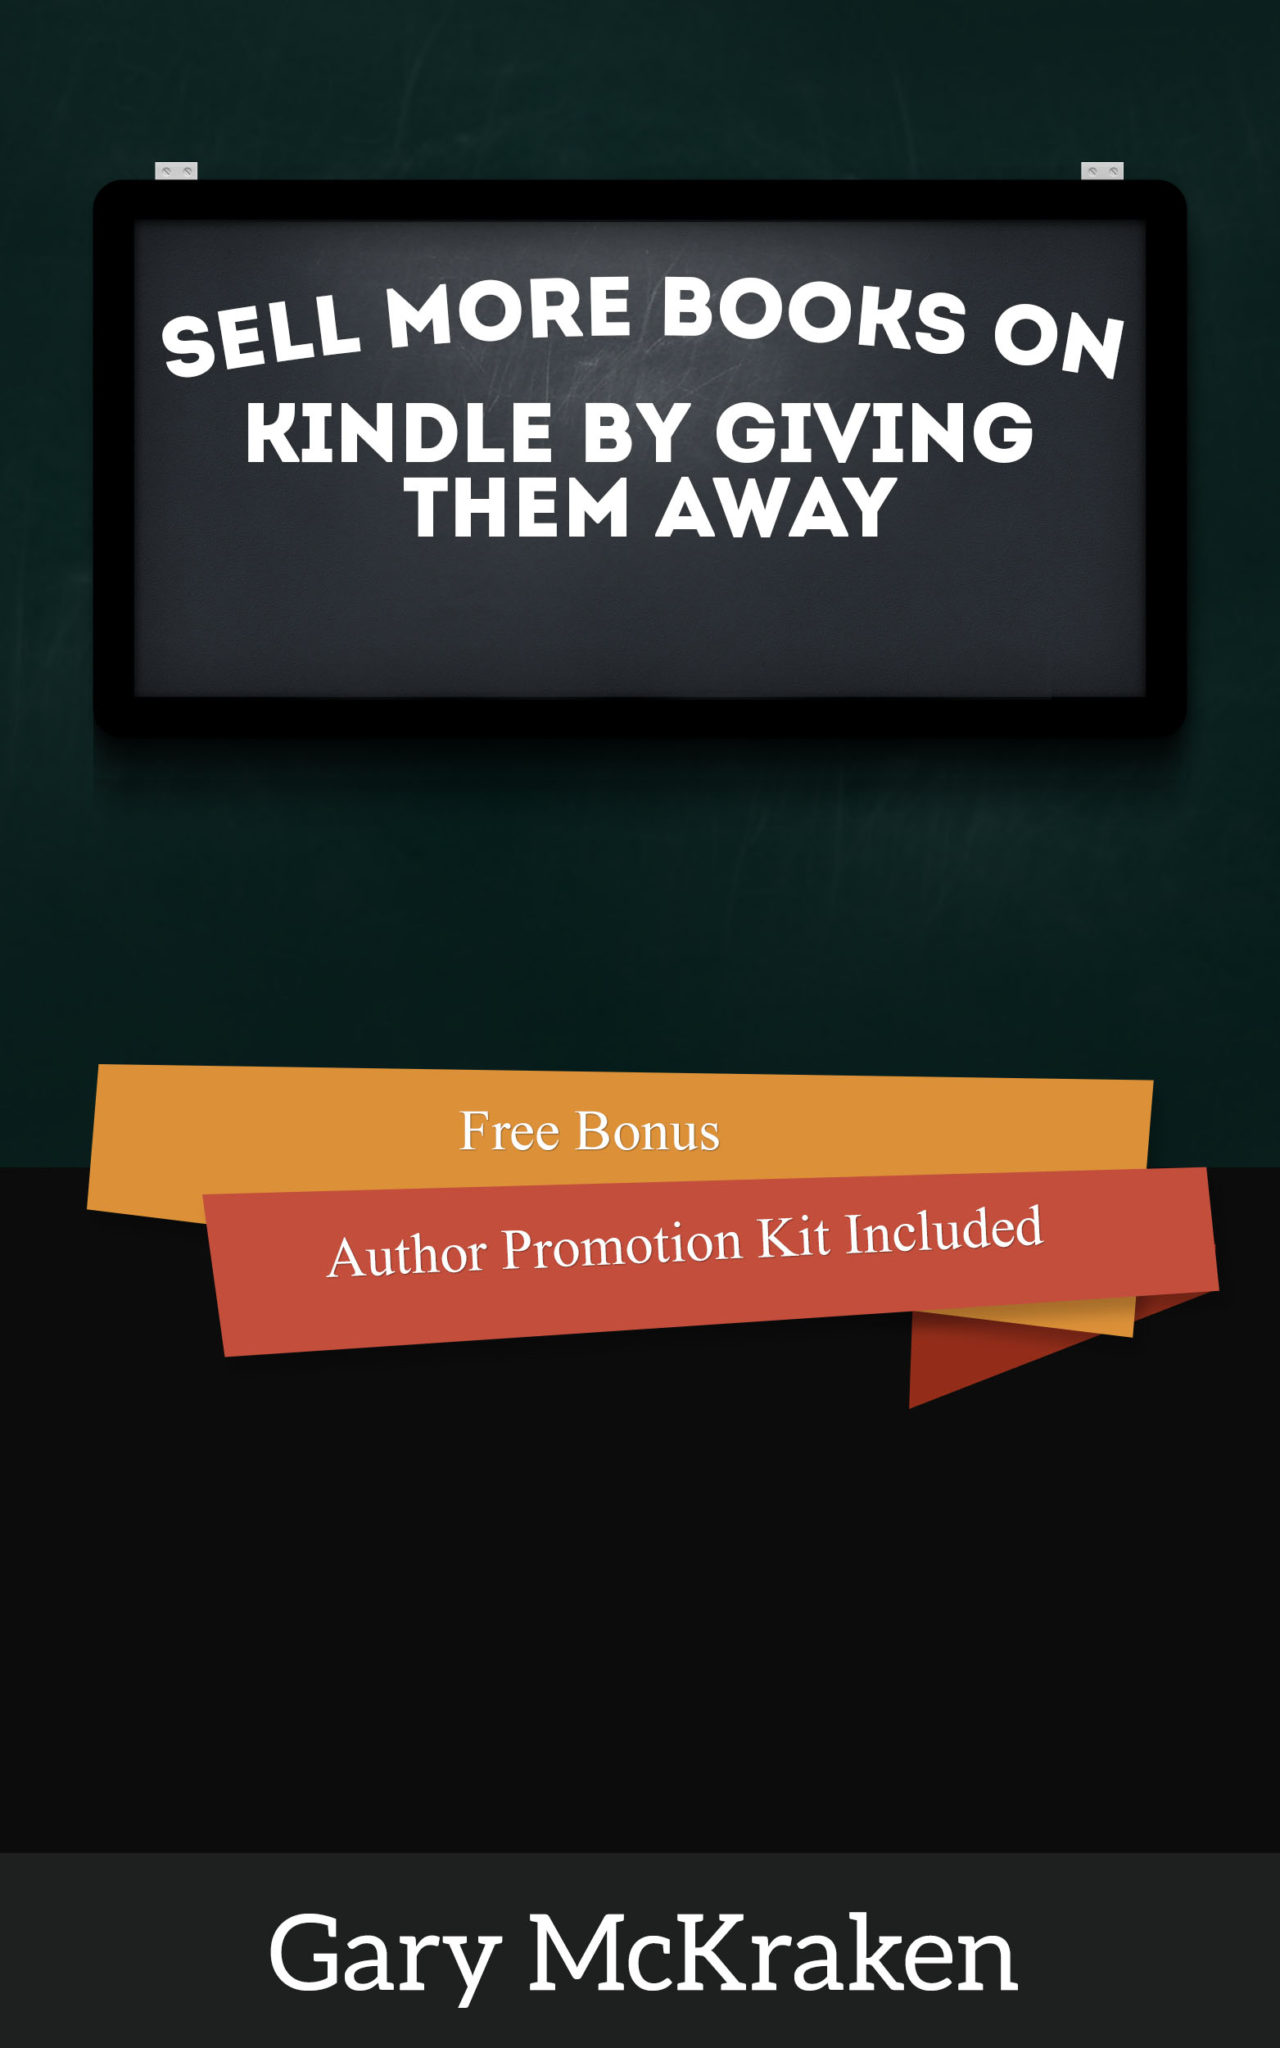 FREE: Sell More Books on Kindle By Giving Them Away by Gary McKraken